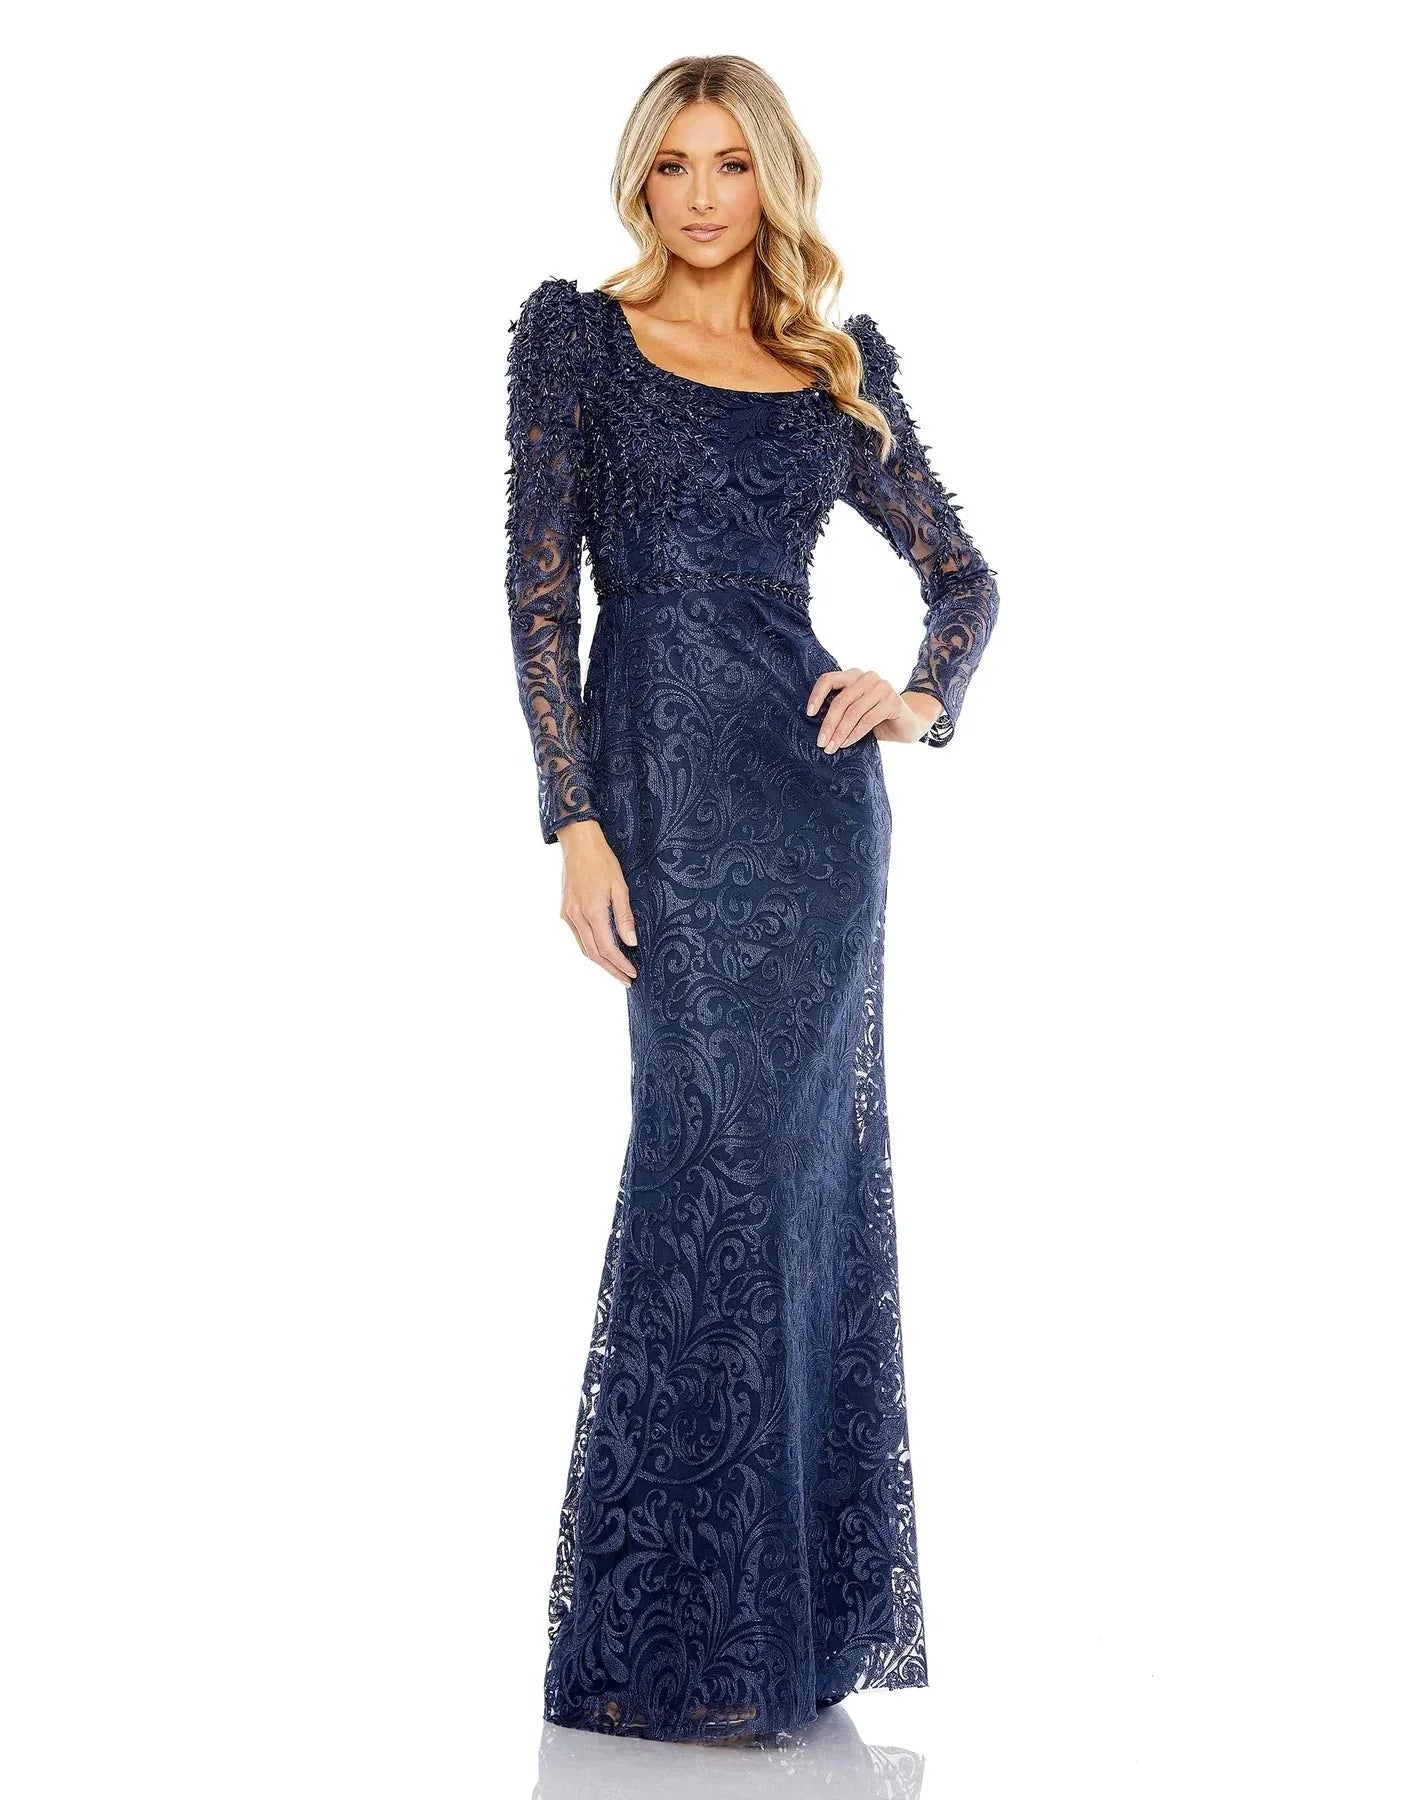 Mac Duggal 11187 - Embroidered Evening Gown
